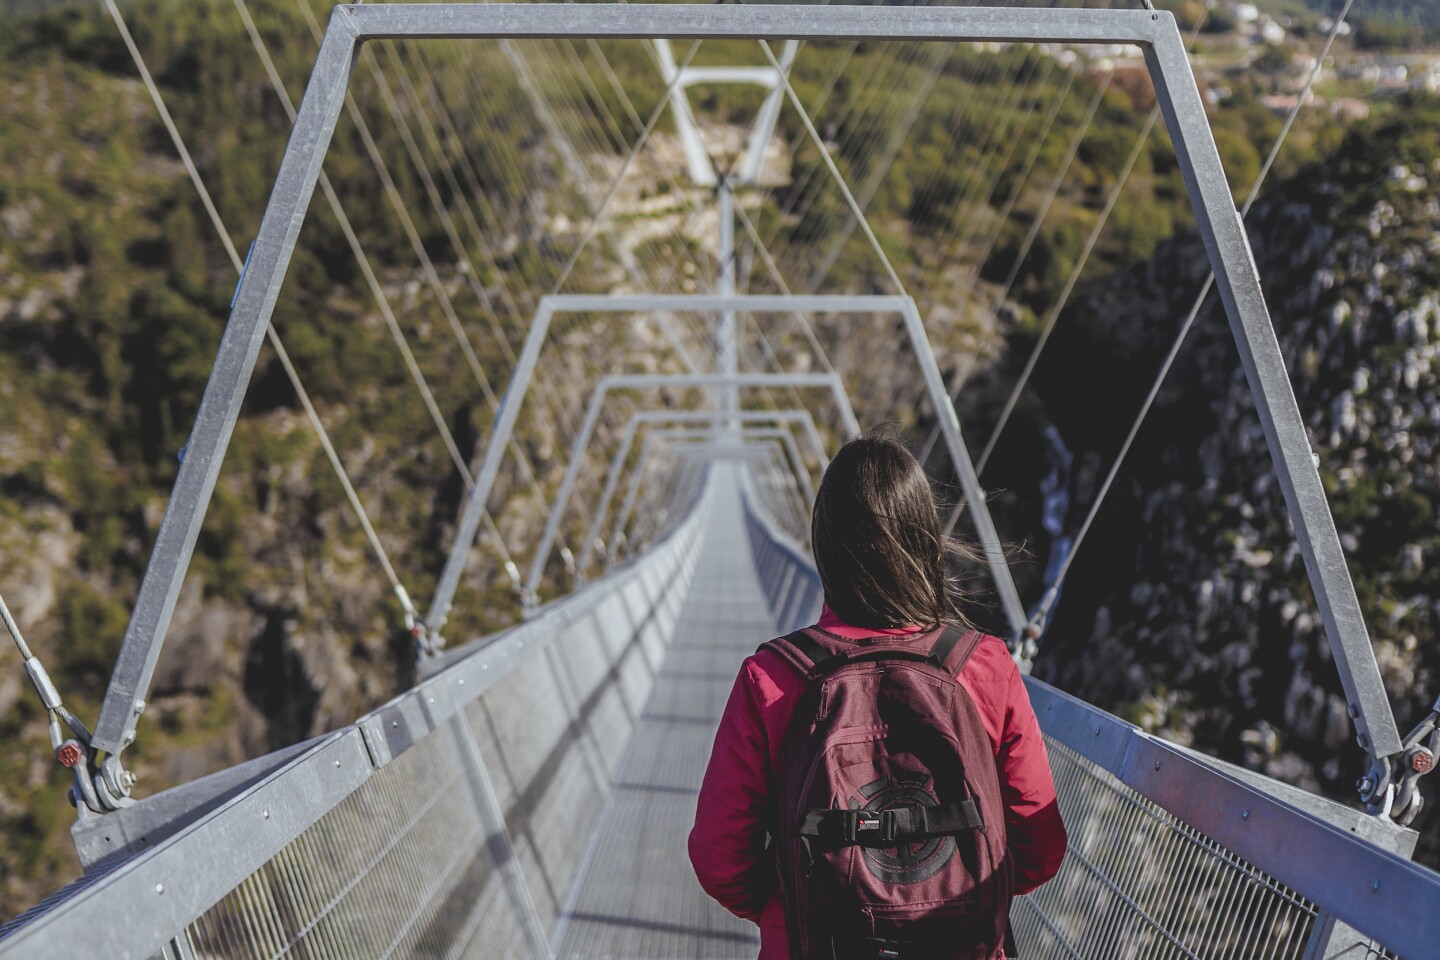 Sky Bridge 721 – Everything You Need to Know about the Longest Suspension Bridge